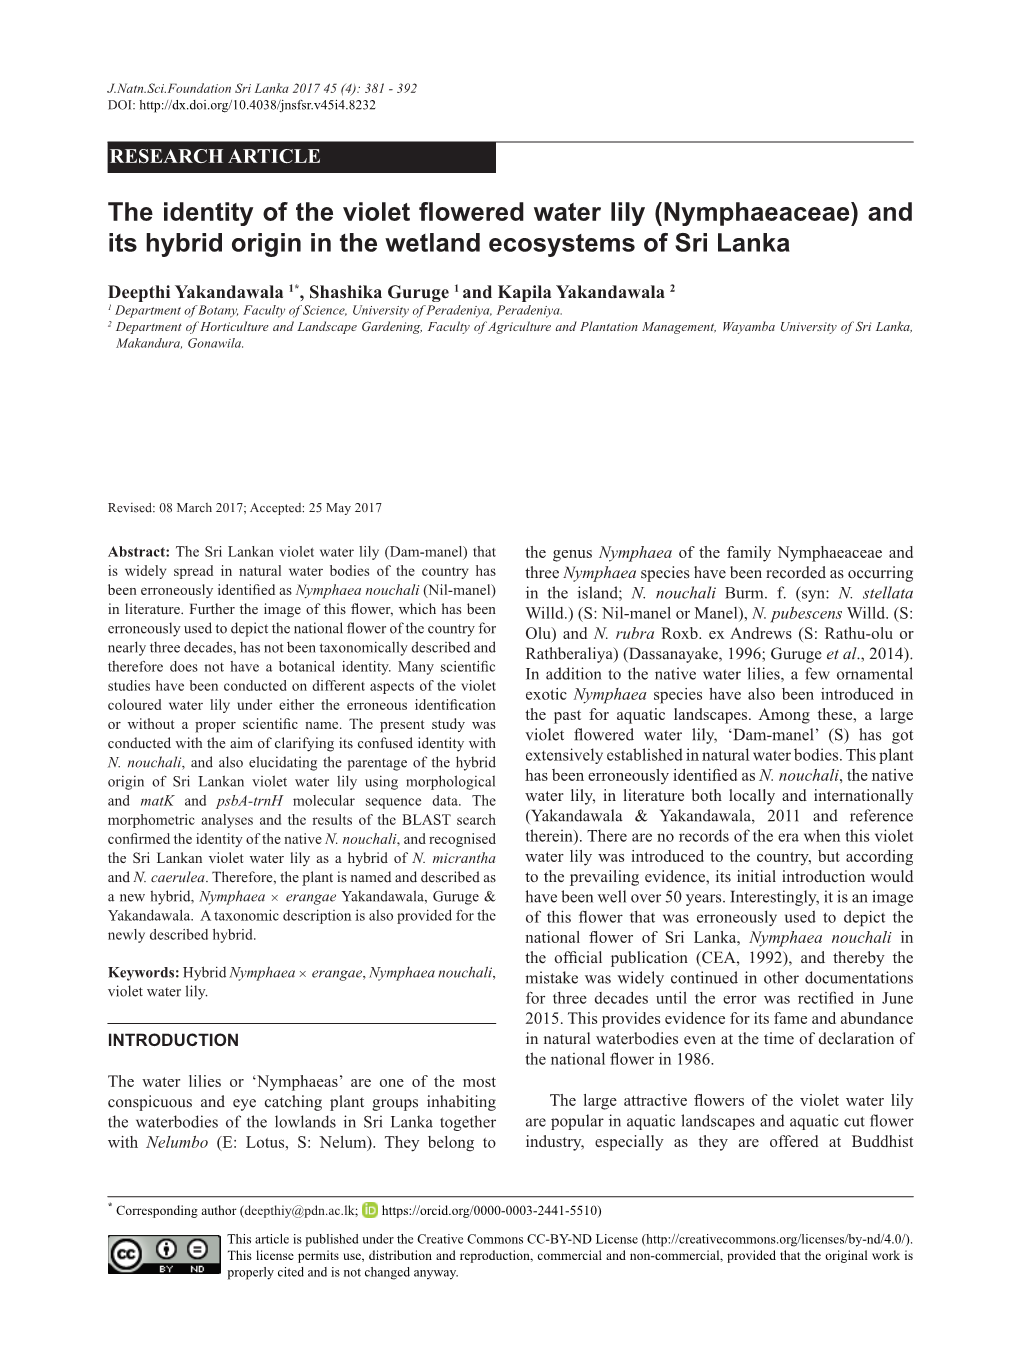 The Identity of the Violet Flowered Water Lily (Nymphaeaceae) and Its Hybrid Origin in the Wetland Ecosystems of Sri Lanka